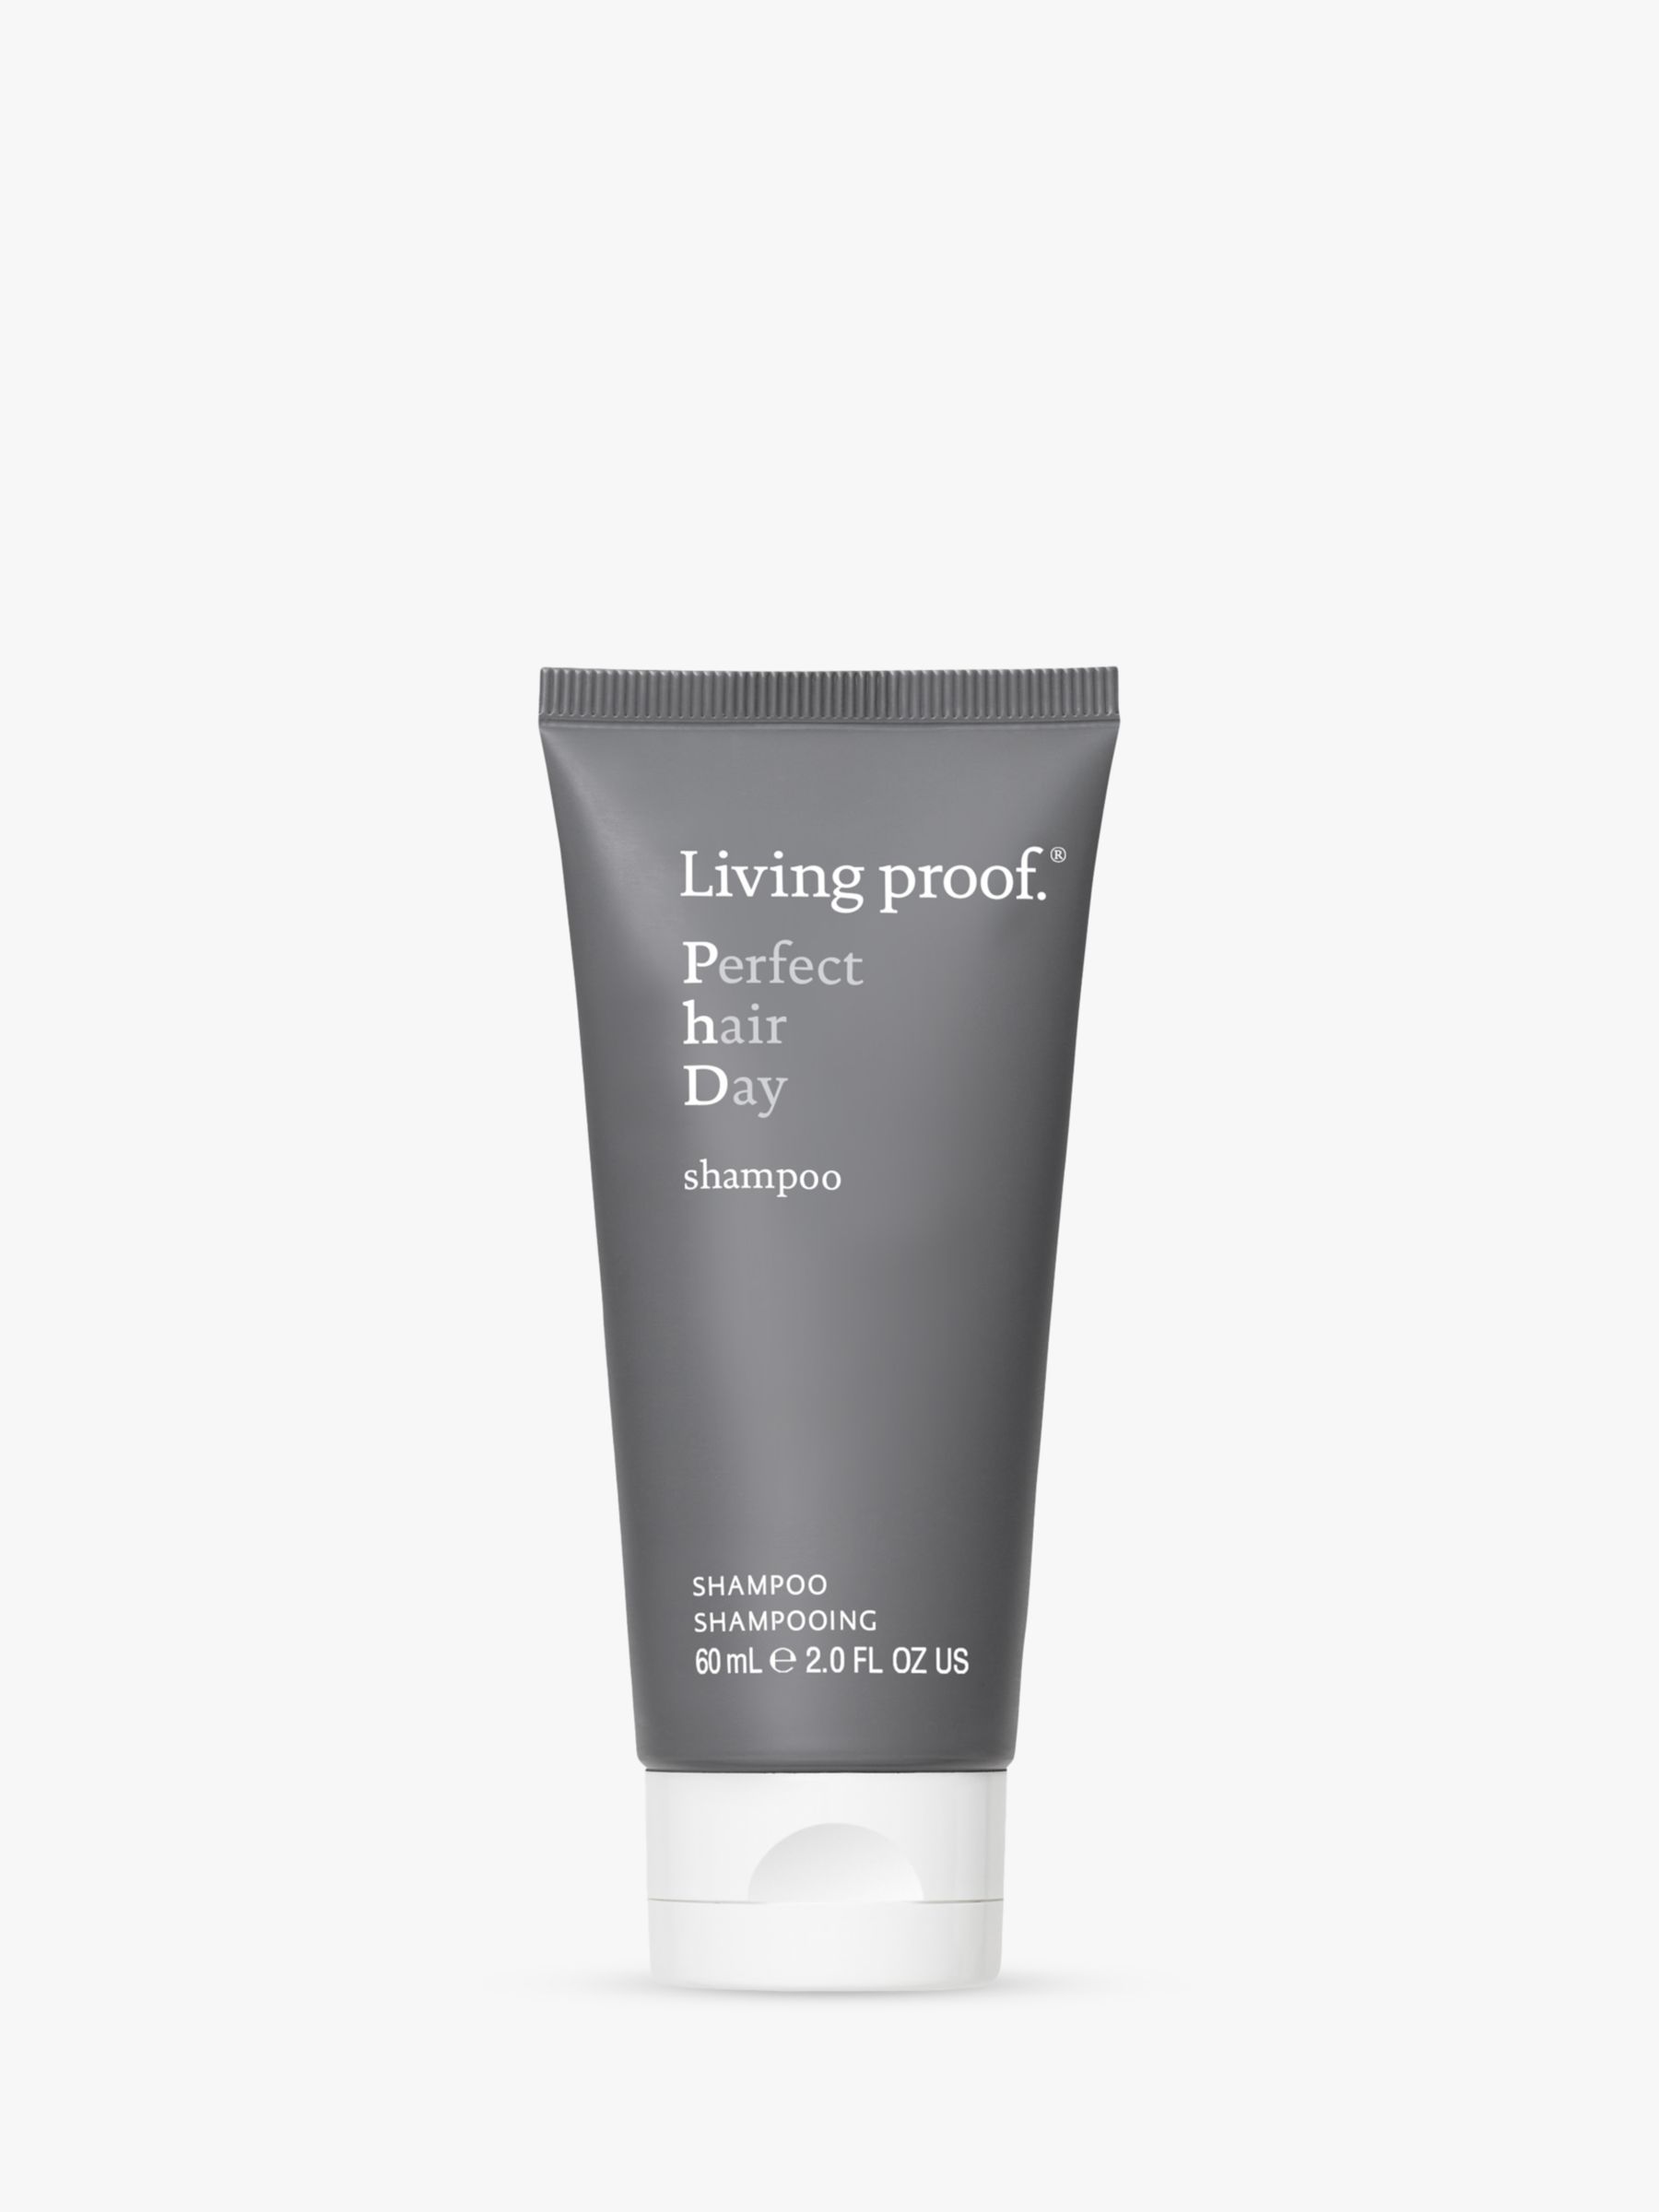 Living Proof Perfect Hair Day Shampoo, 60ml 1